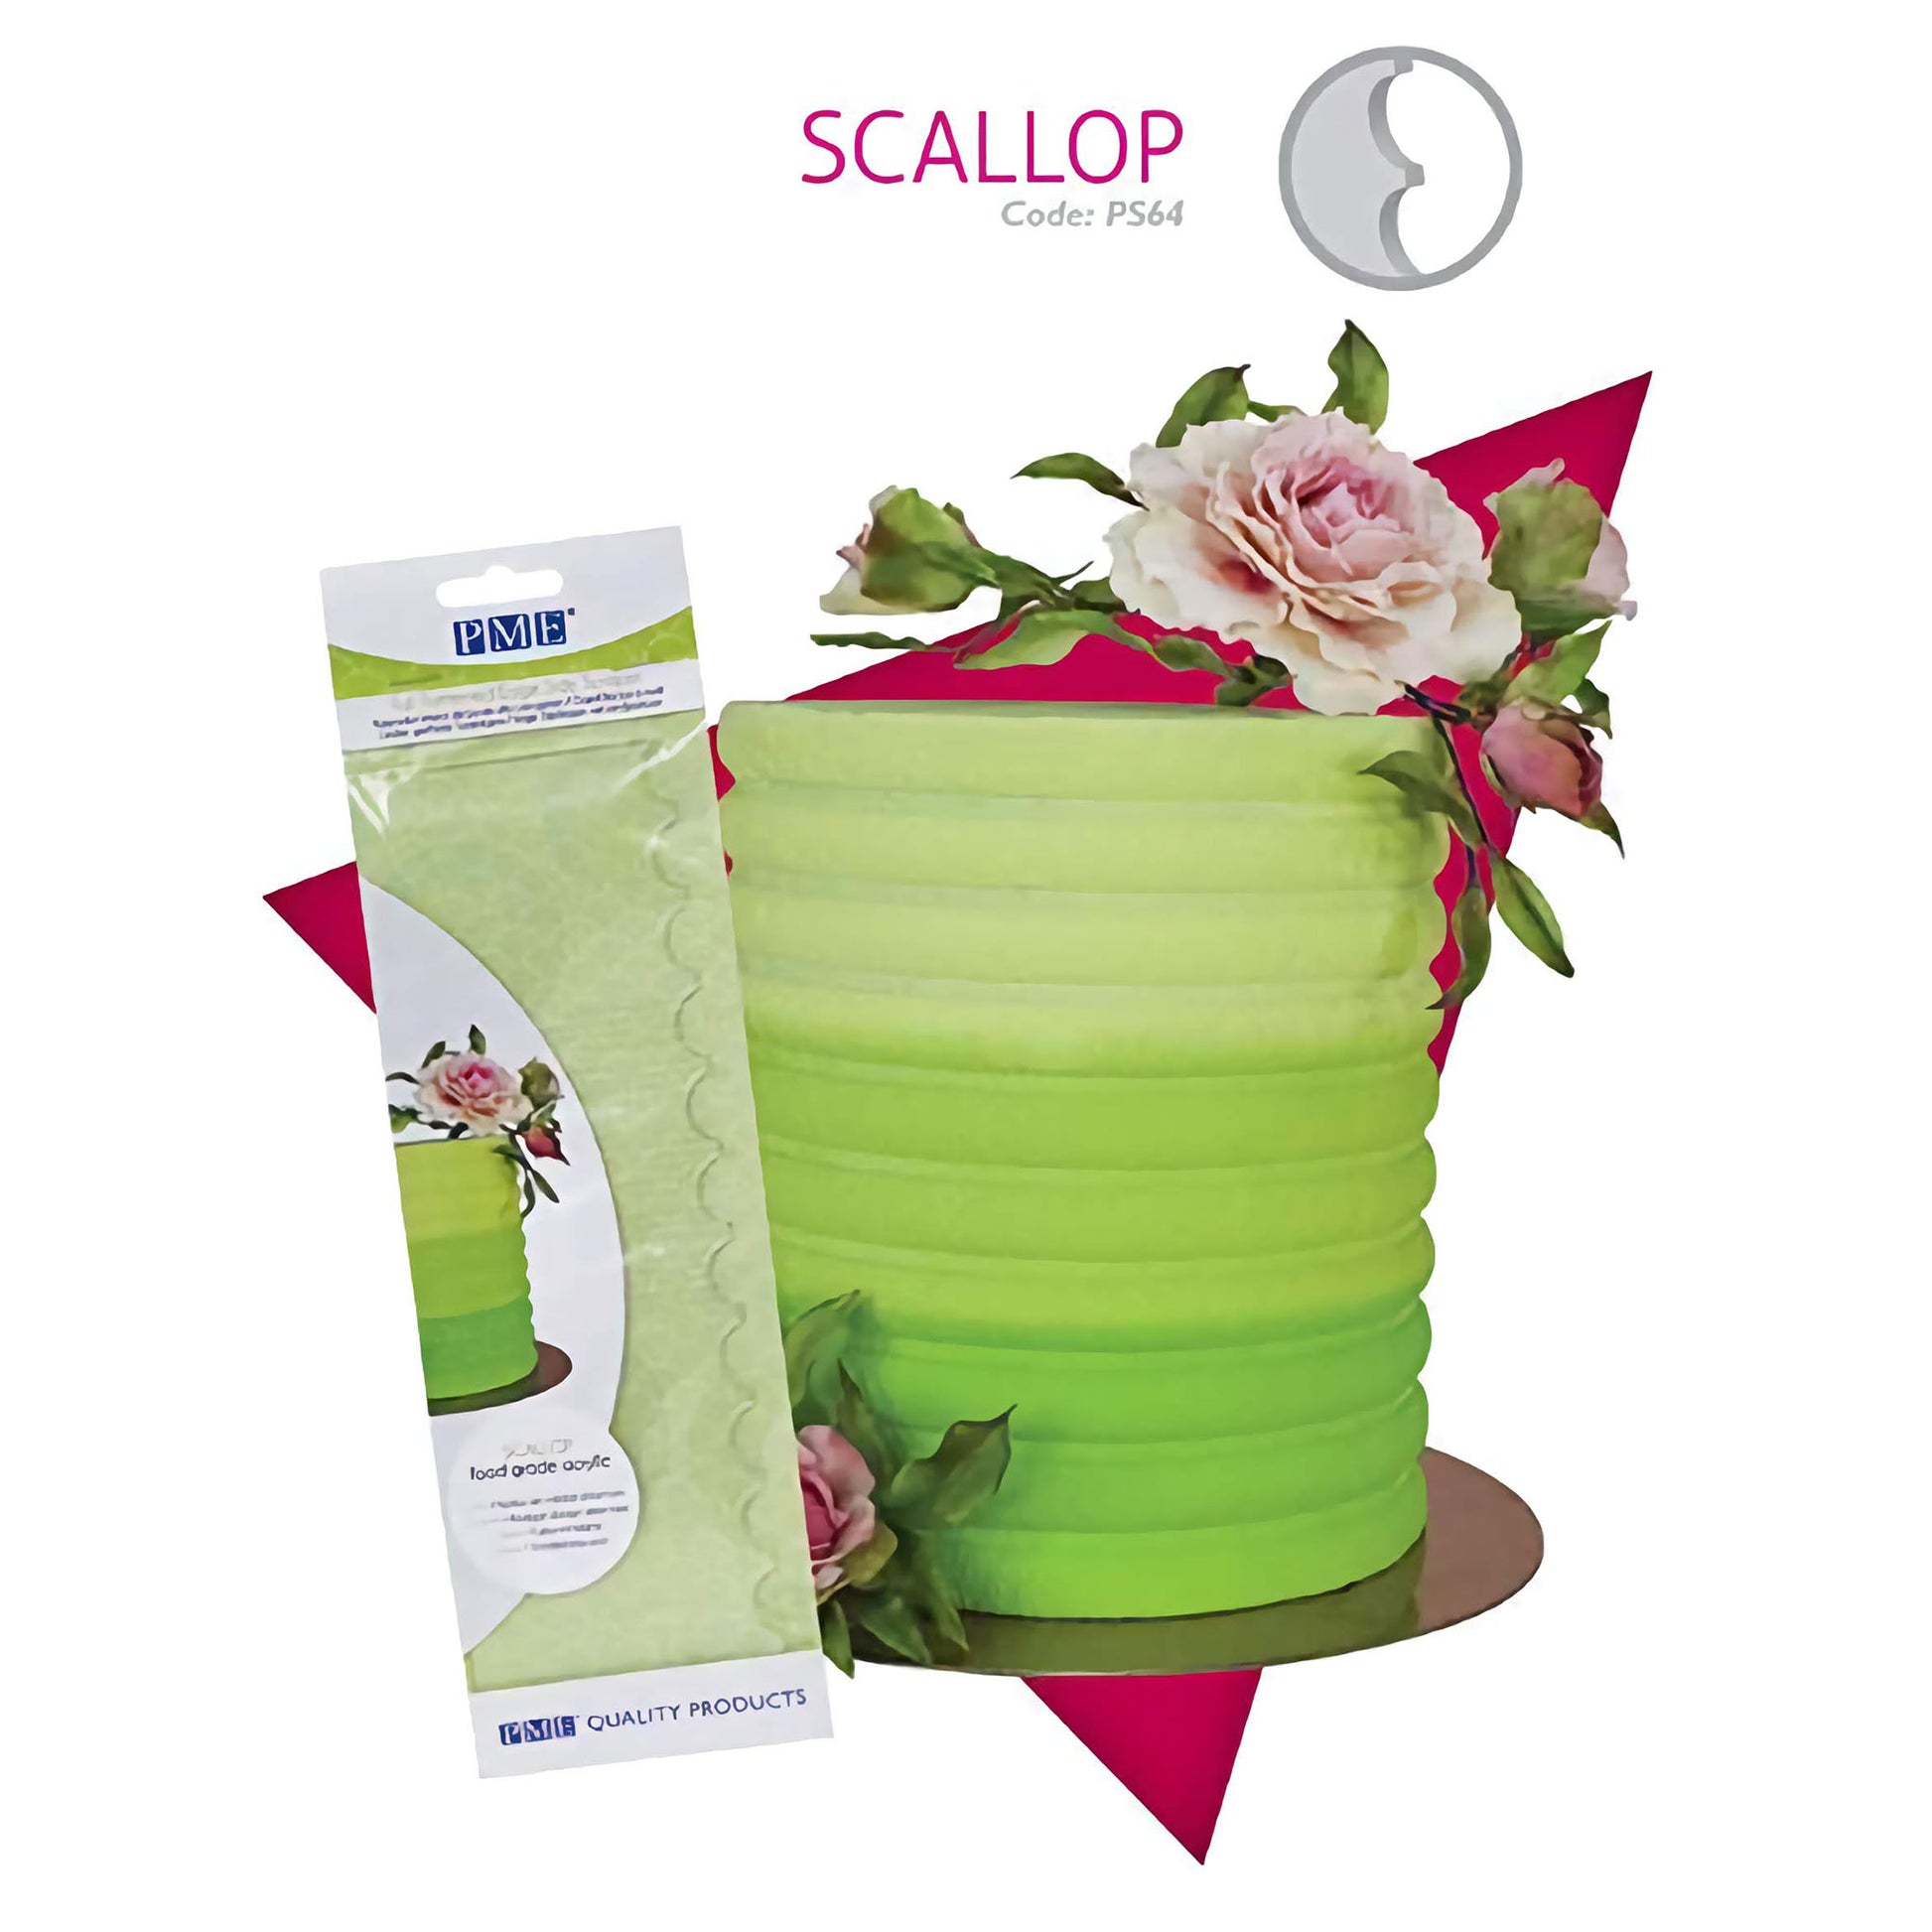 a tall cake side scraper with a scalloped pattern by PME Quality Products, code PS64. The scraper is displayed in its packaging, and next to it is a beautifully decorated green ombre cake with a scalloped texture on the sides, created using the scraper. The cake is adorned with pink roses and green leaves for an elegant presentation.